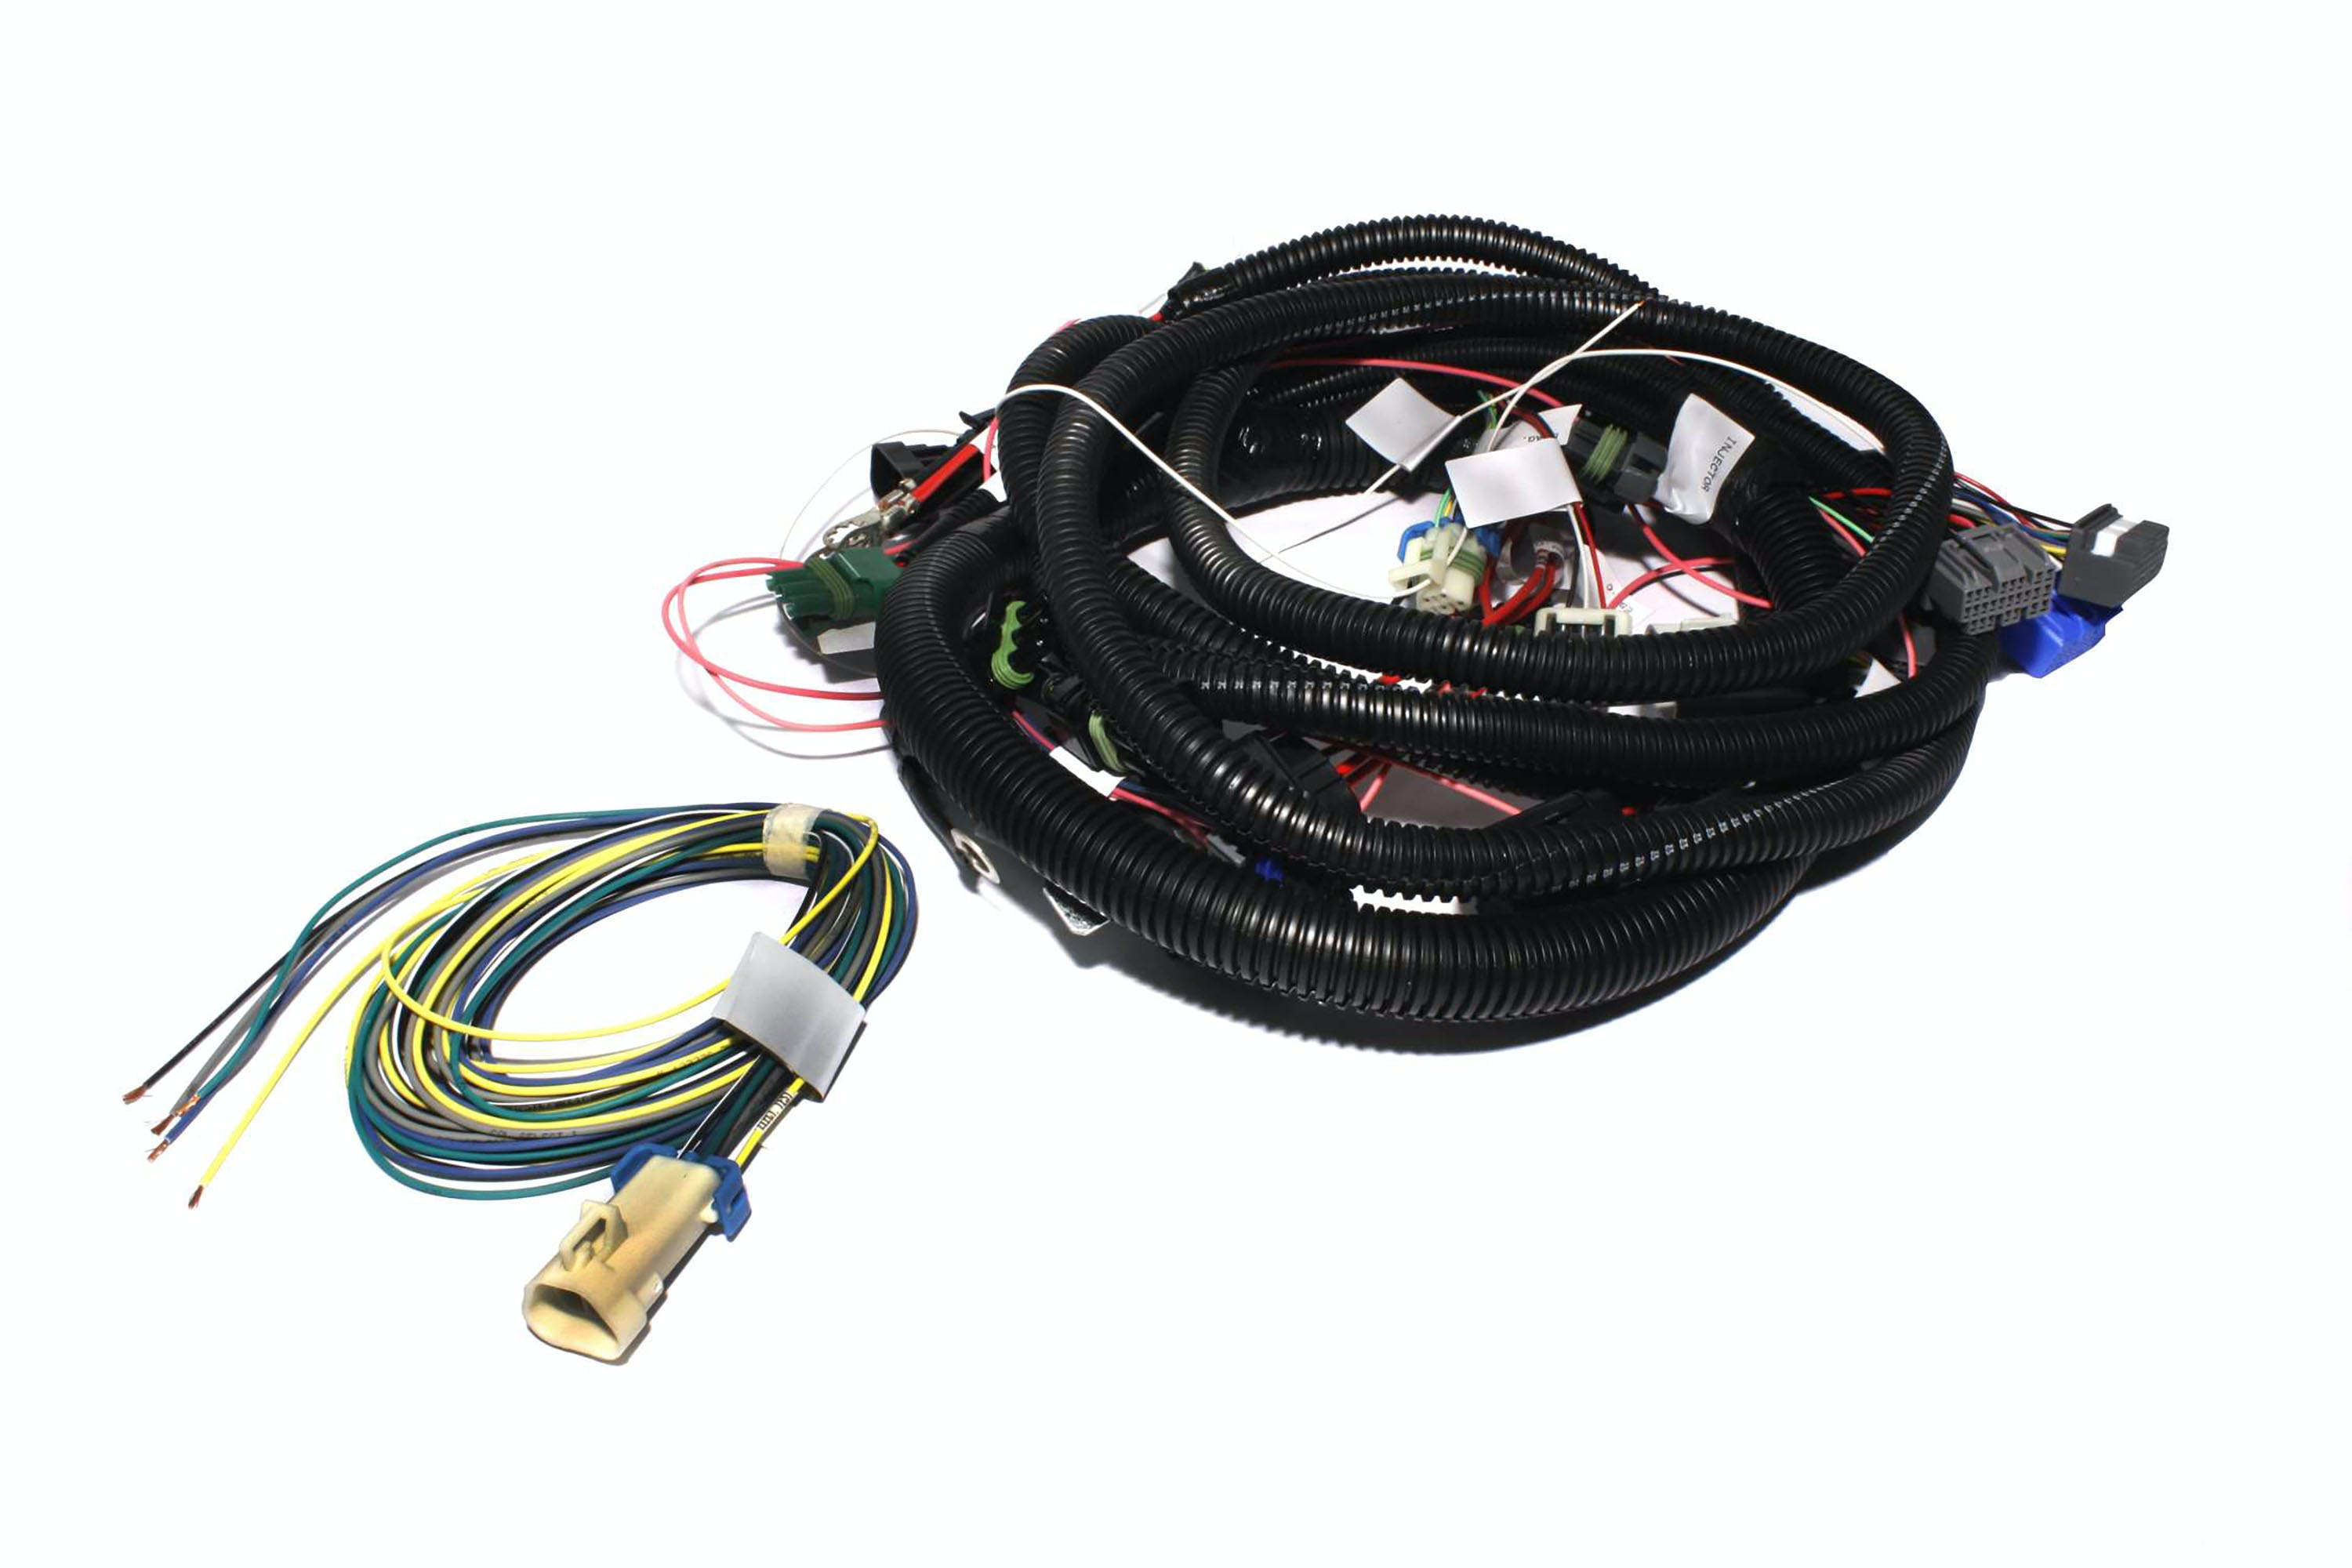 FAST - Fuel Air Spark Technology 301106 Wiring Harness, Fast Main Dragster/Boat